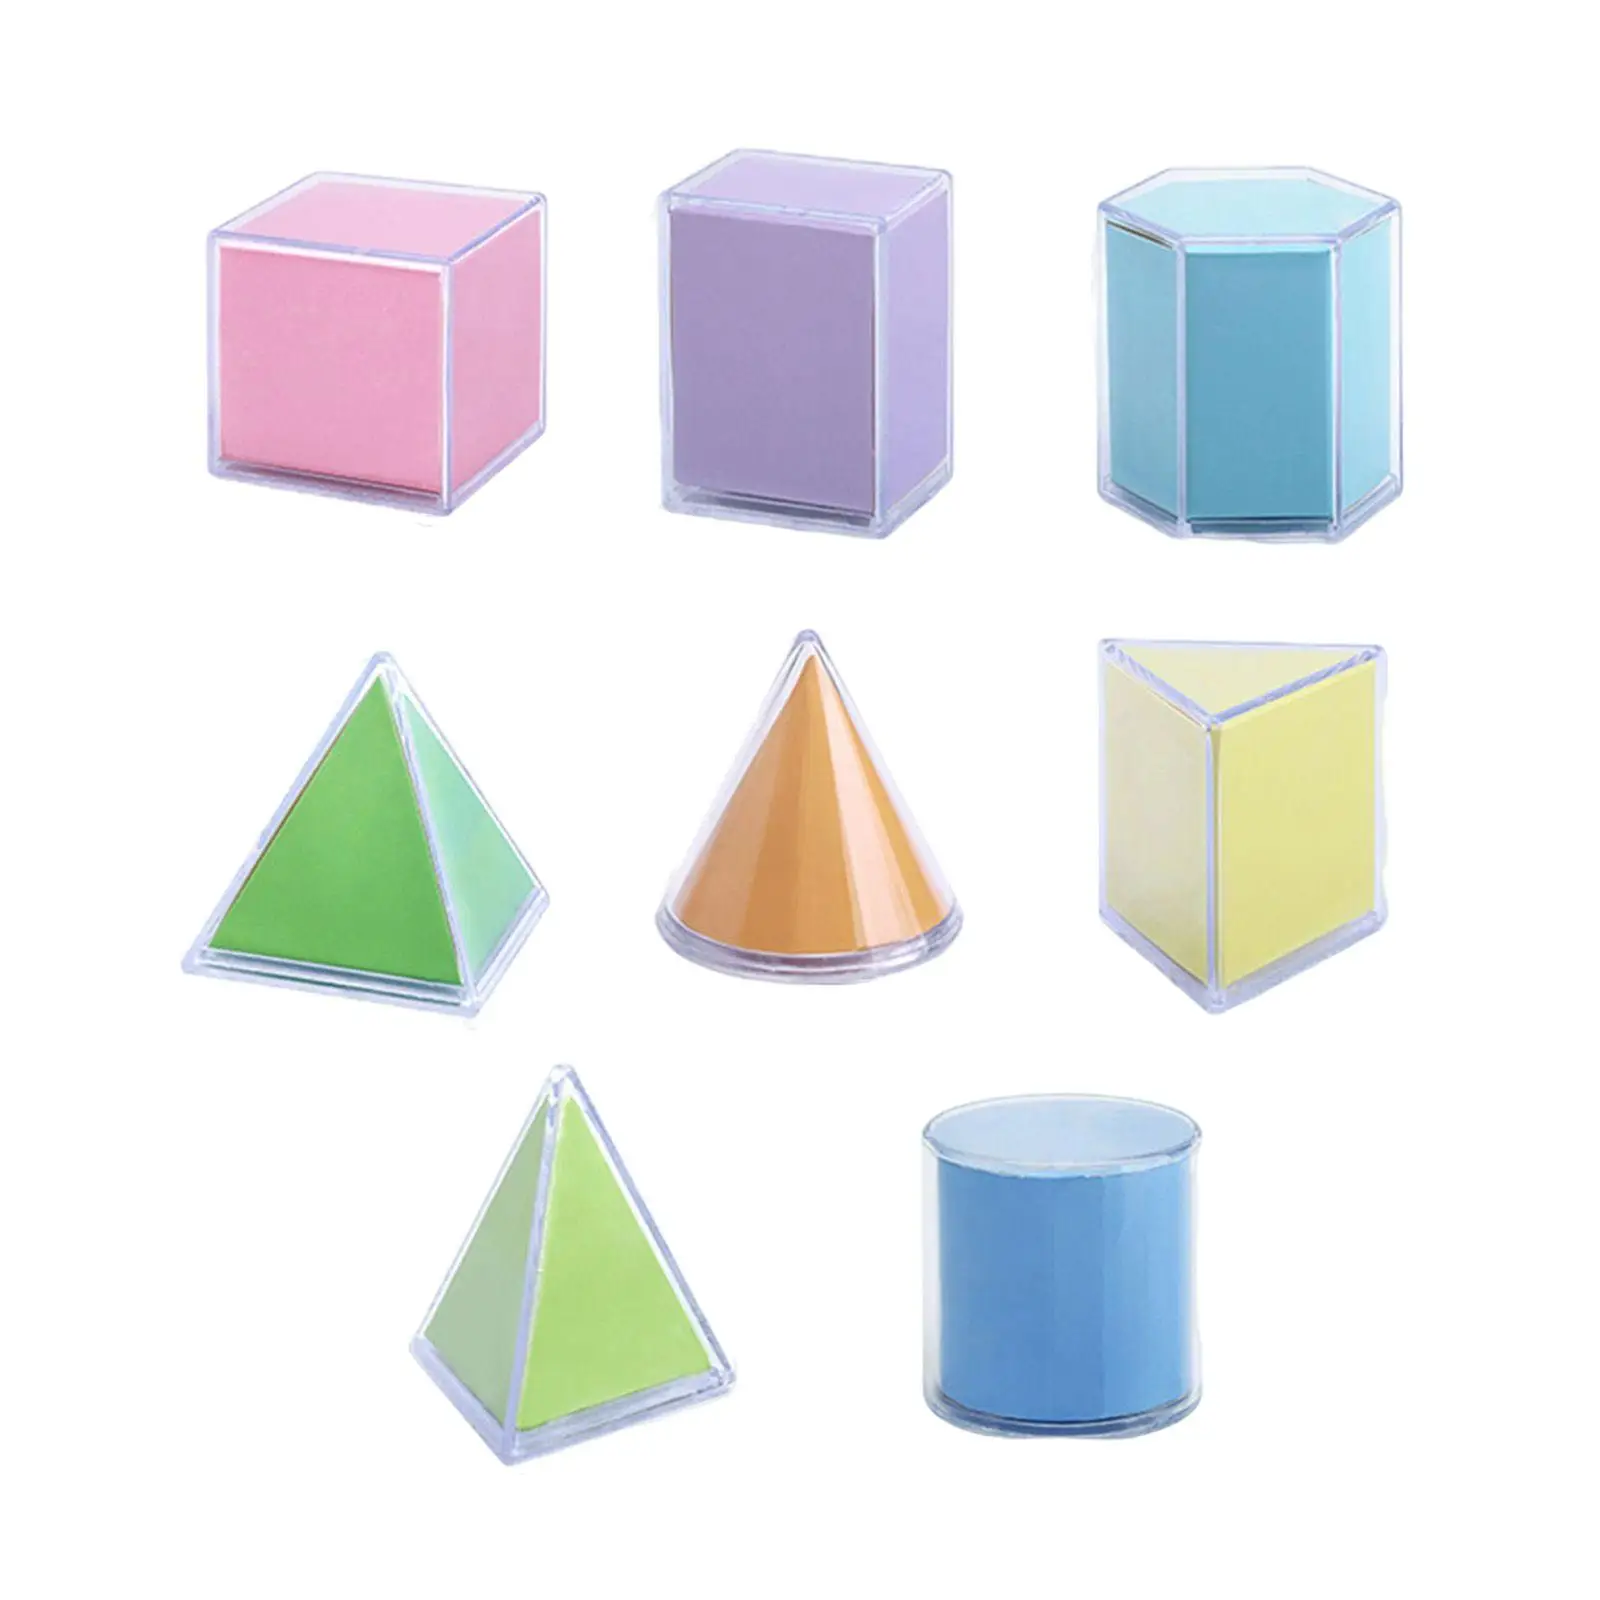 8 Pieces Transparent Geometric Shapes Blocks Montessori Toys Stacking Game Shape Sorter Sorting Toy for Babies Kids Toddler